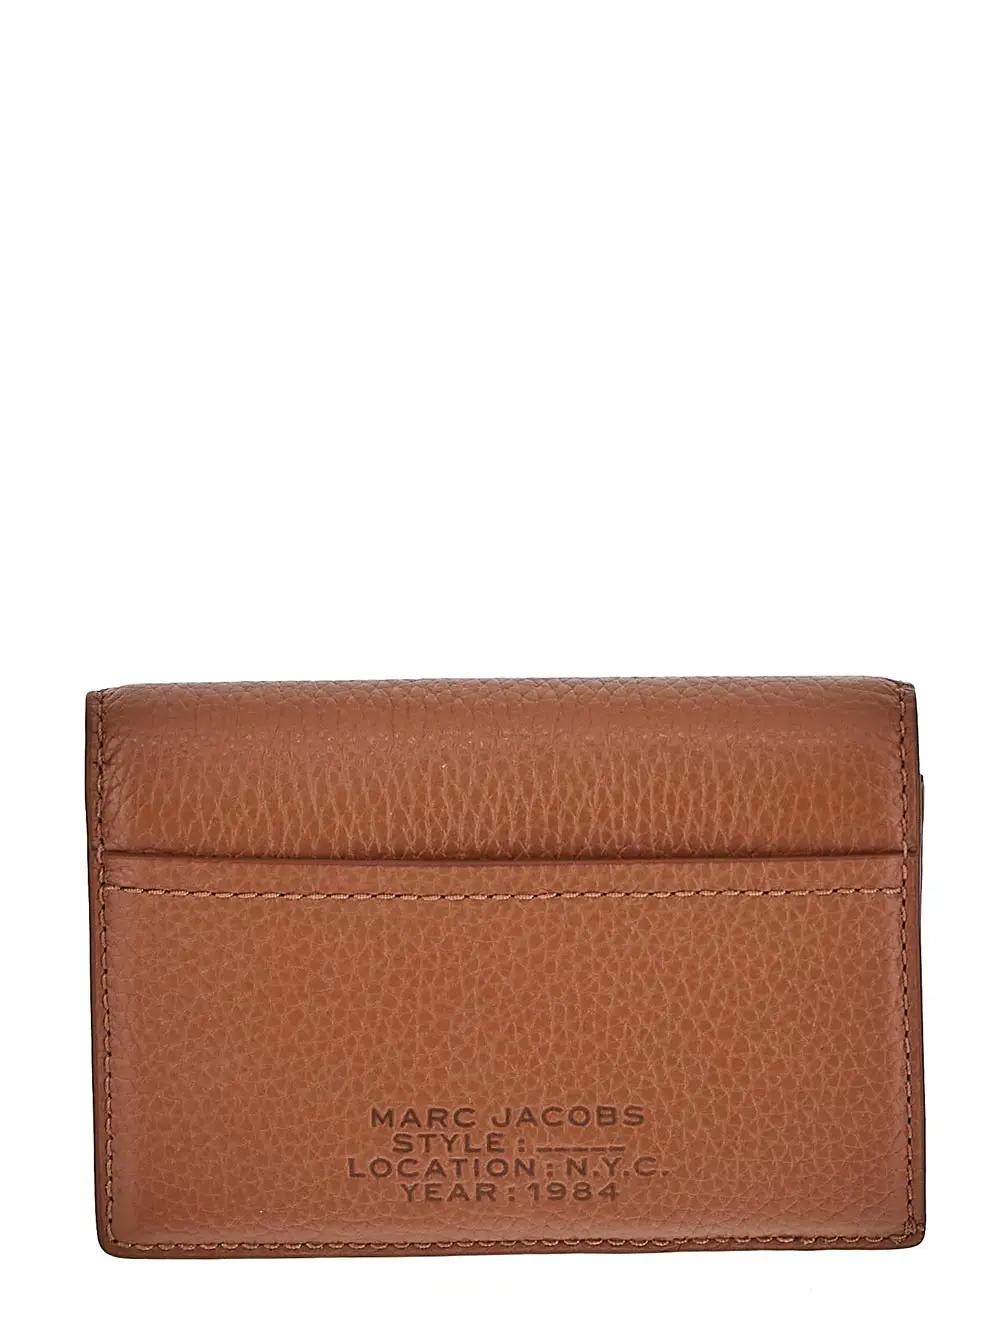 MARC JACOBS SMALL BIFOLD WALLET